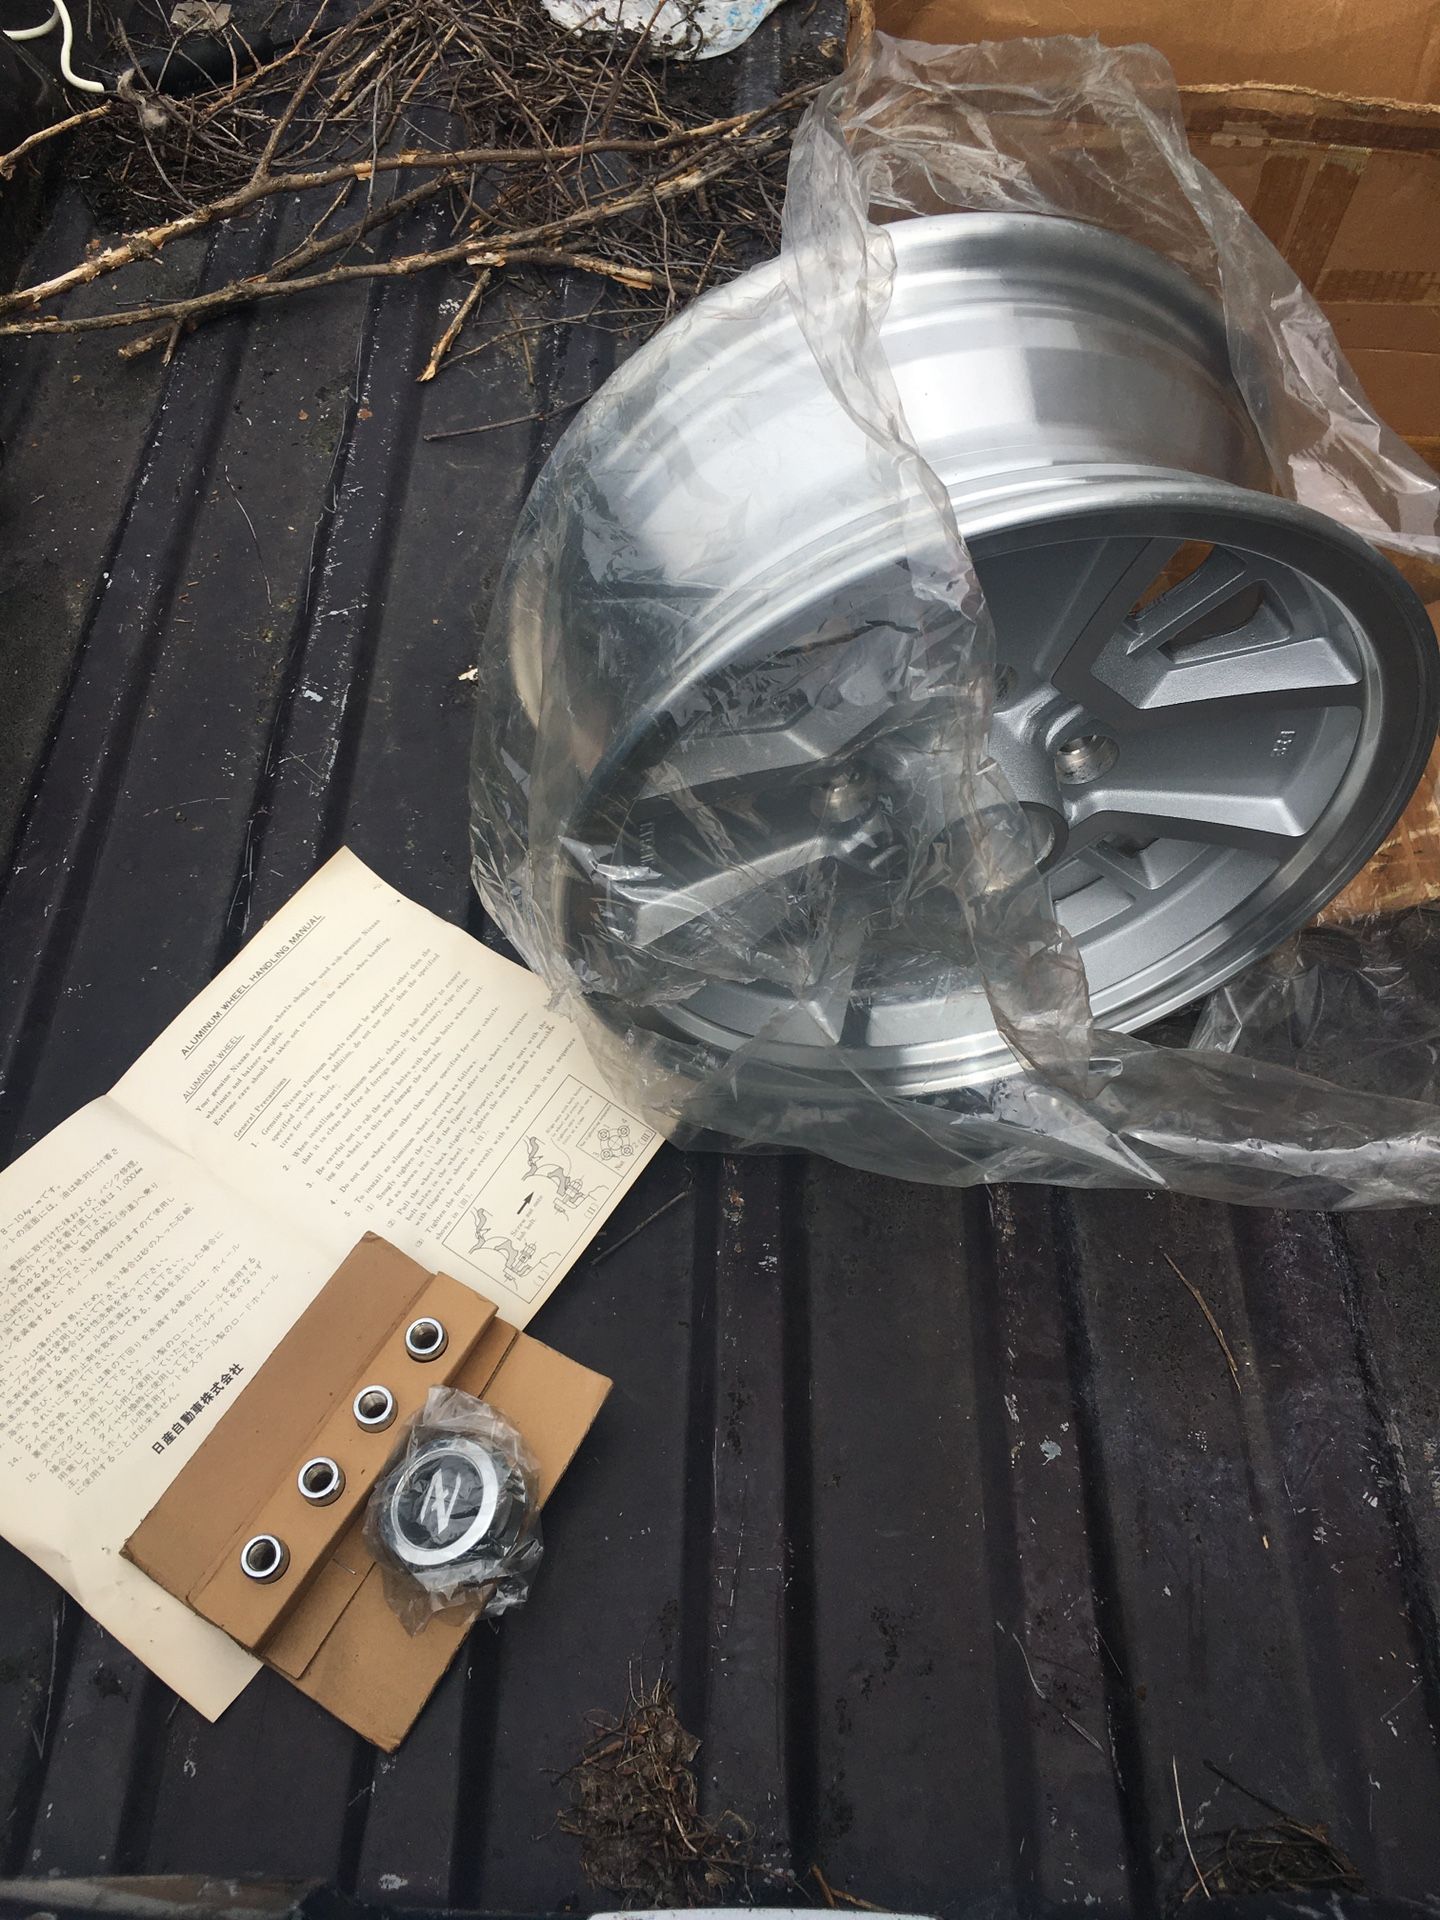 BRAND NEW 1-FACTORY NISSAN DATSUN 280-ZX 4-SPOKE ALUMINUM RIM WITH FACTORY LUG NUTS AND CENTER CAP 1979/1983-$100.00